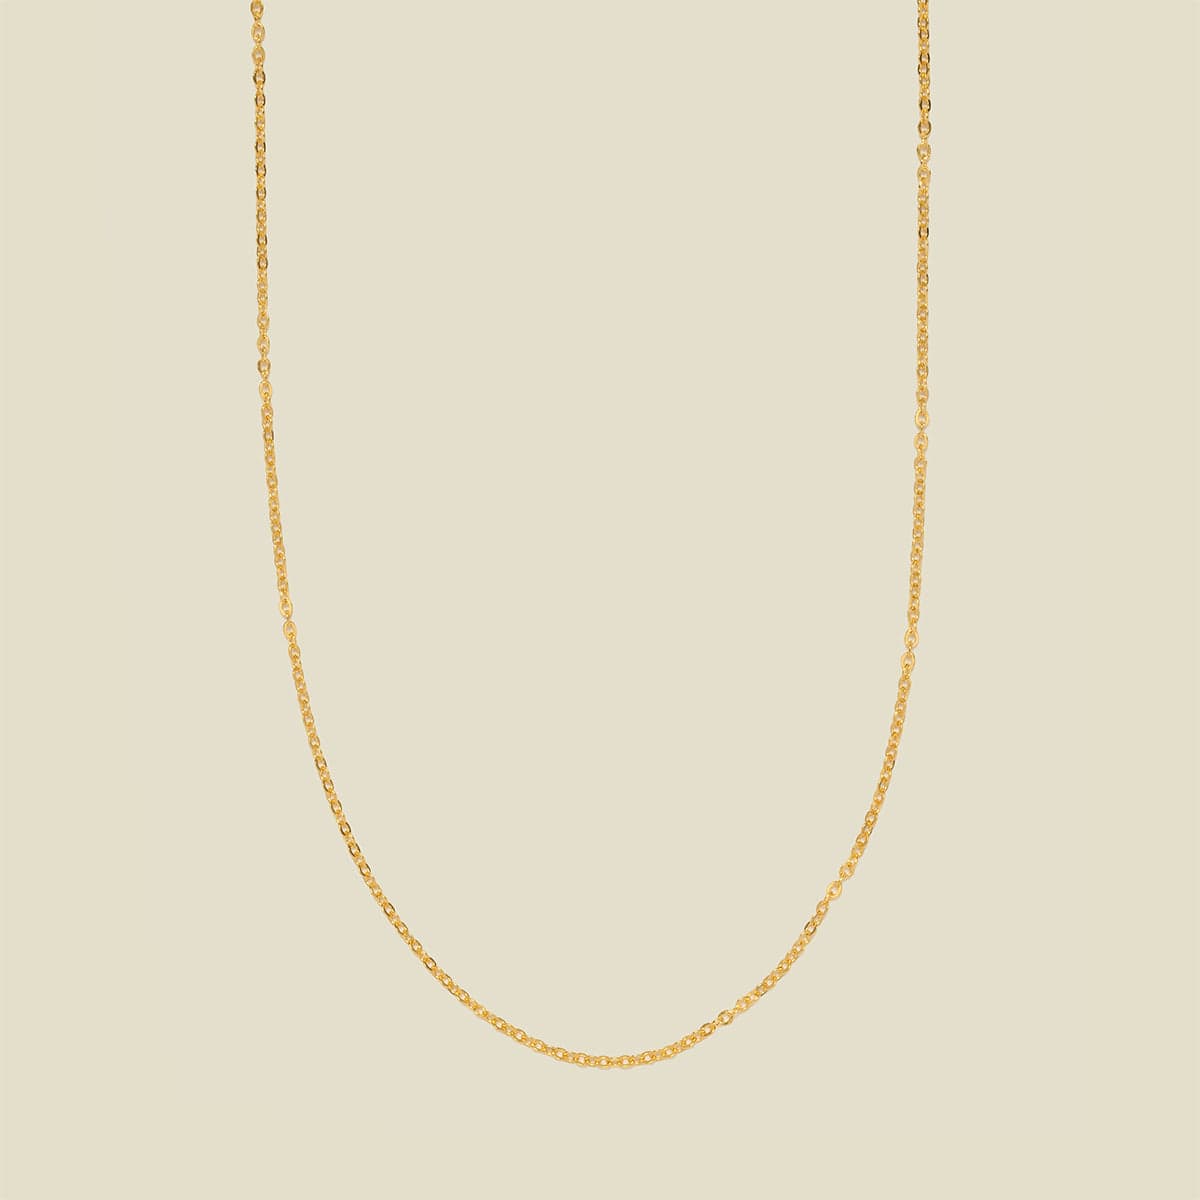 Adjustable Flat Cable Chain Gold Filled / 1.2mm / 13"-15" Necklace